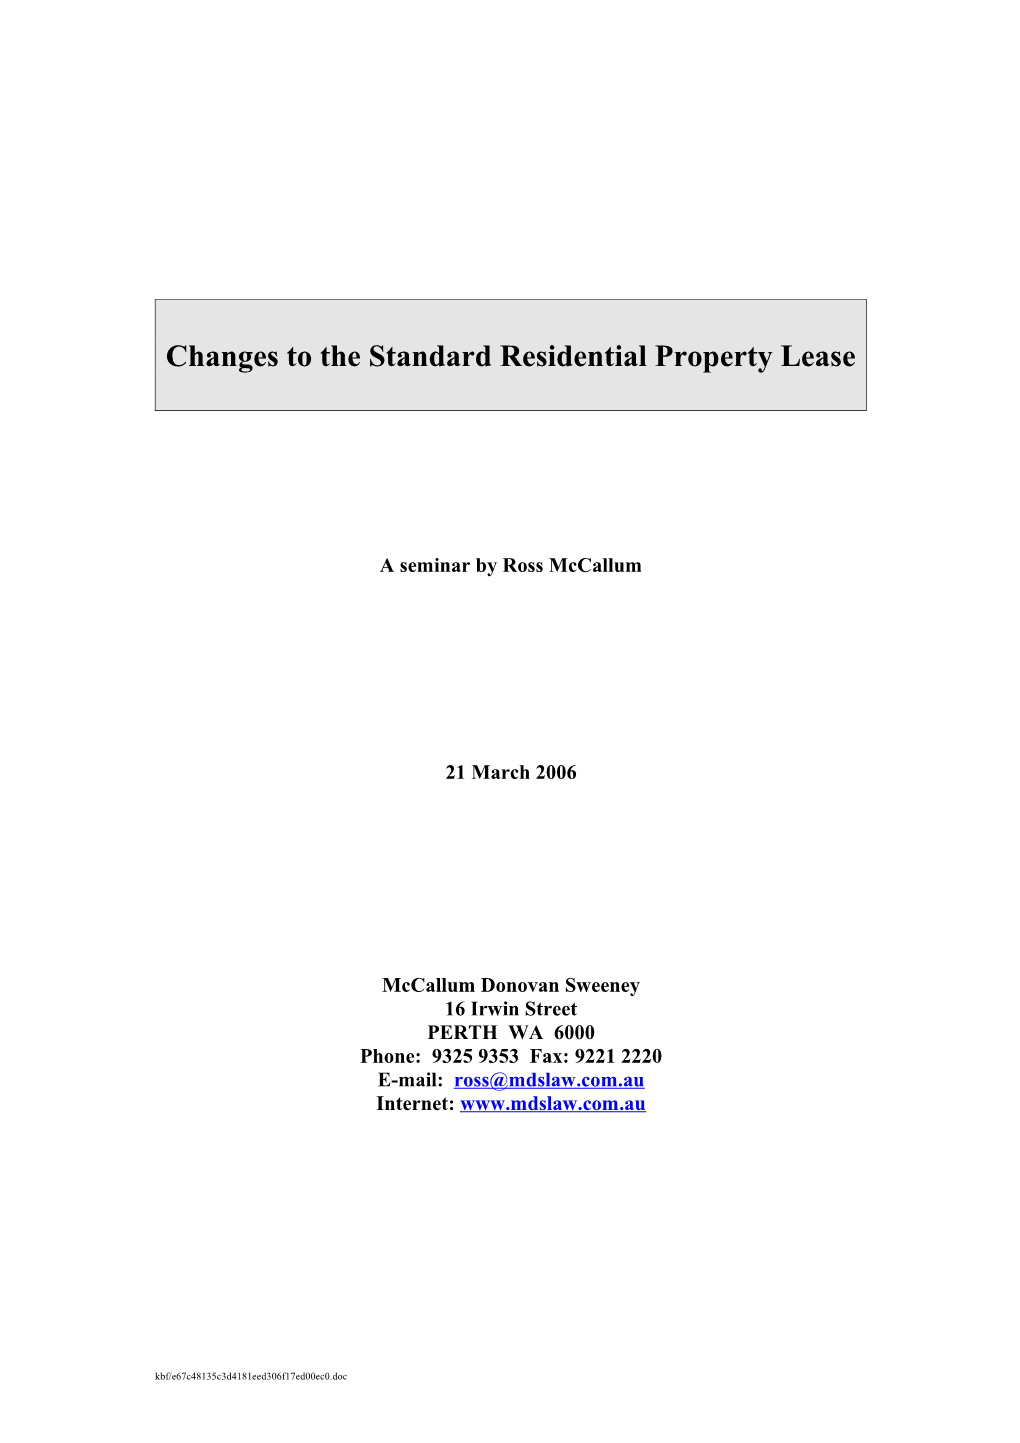 Seminar Paper - Changes to Std Residential Property Lease (00106302;1)